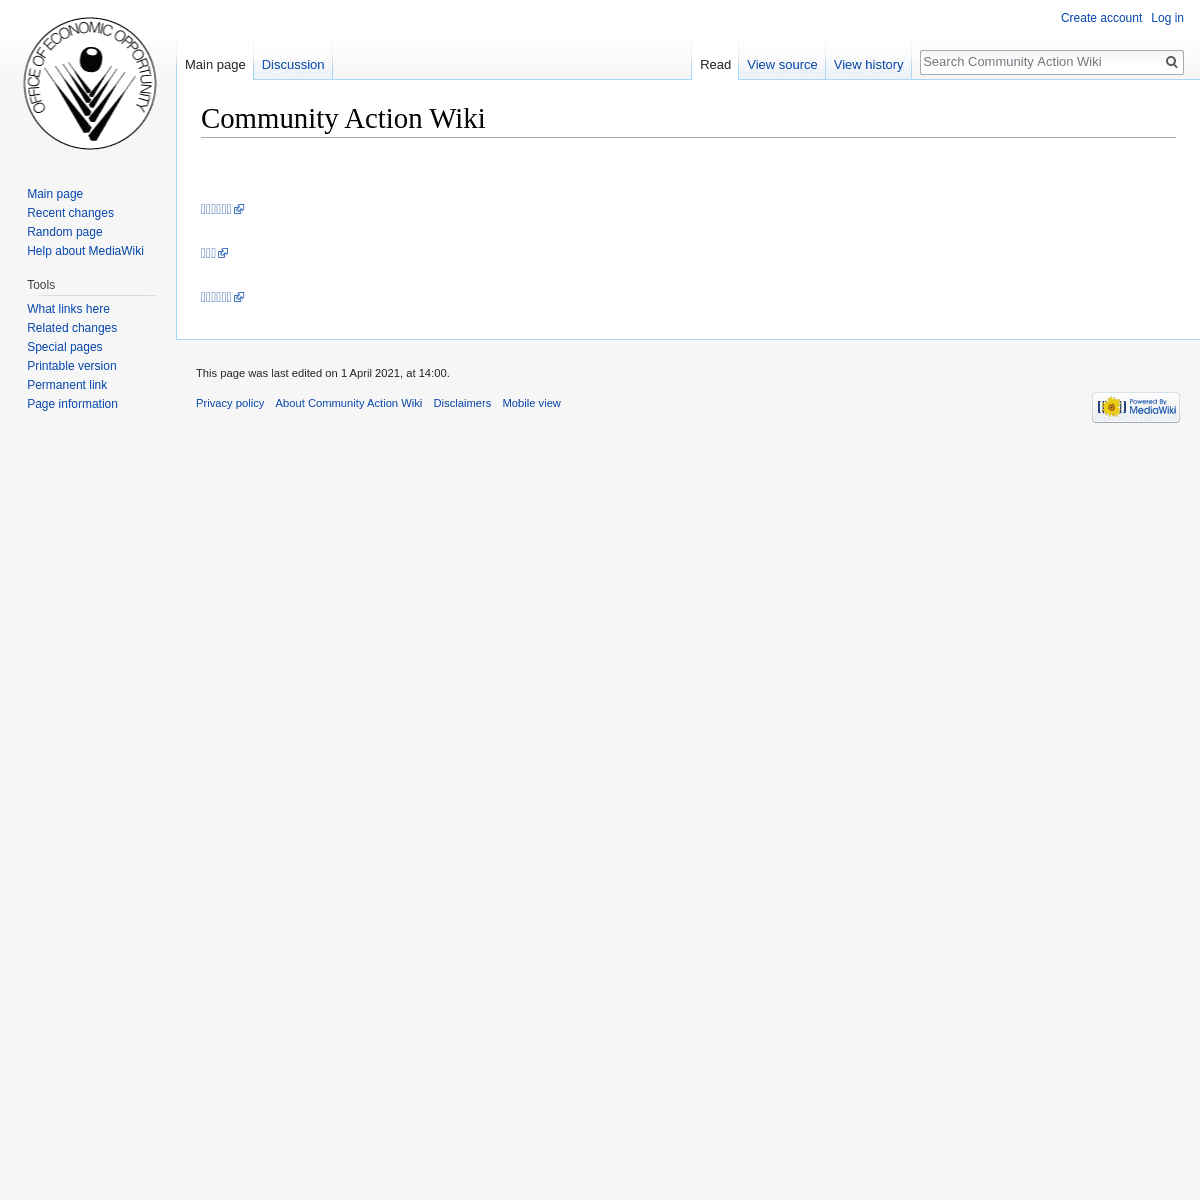 A complete backup of https://communityaction.wiki